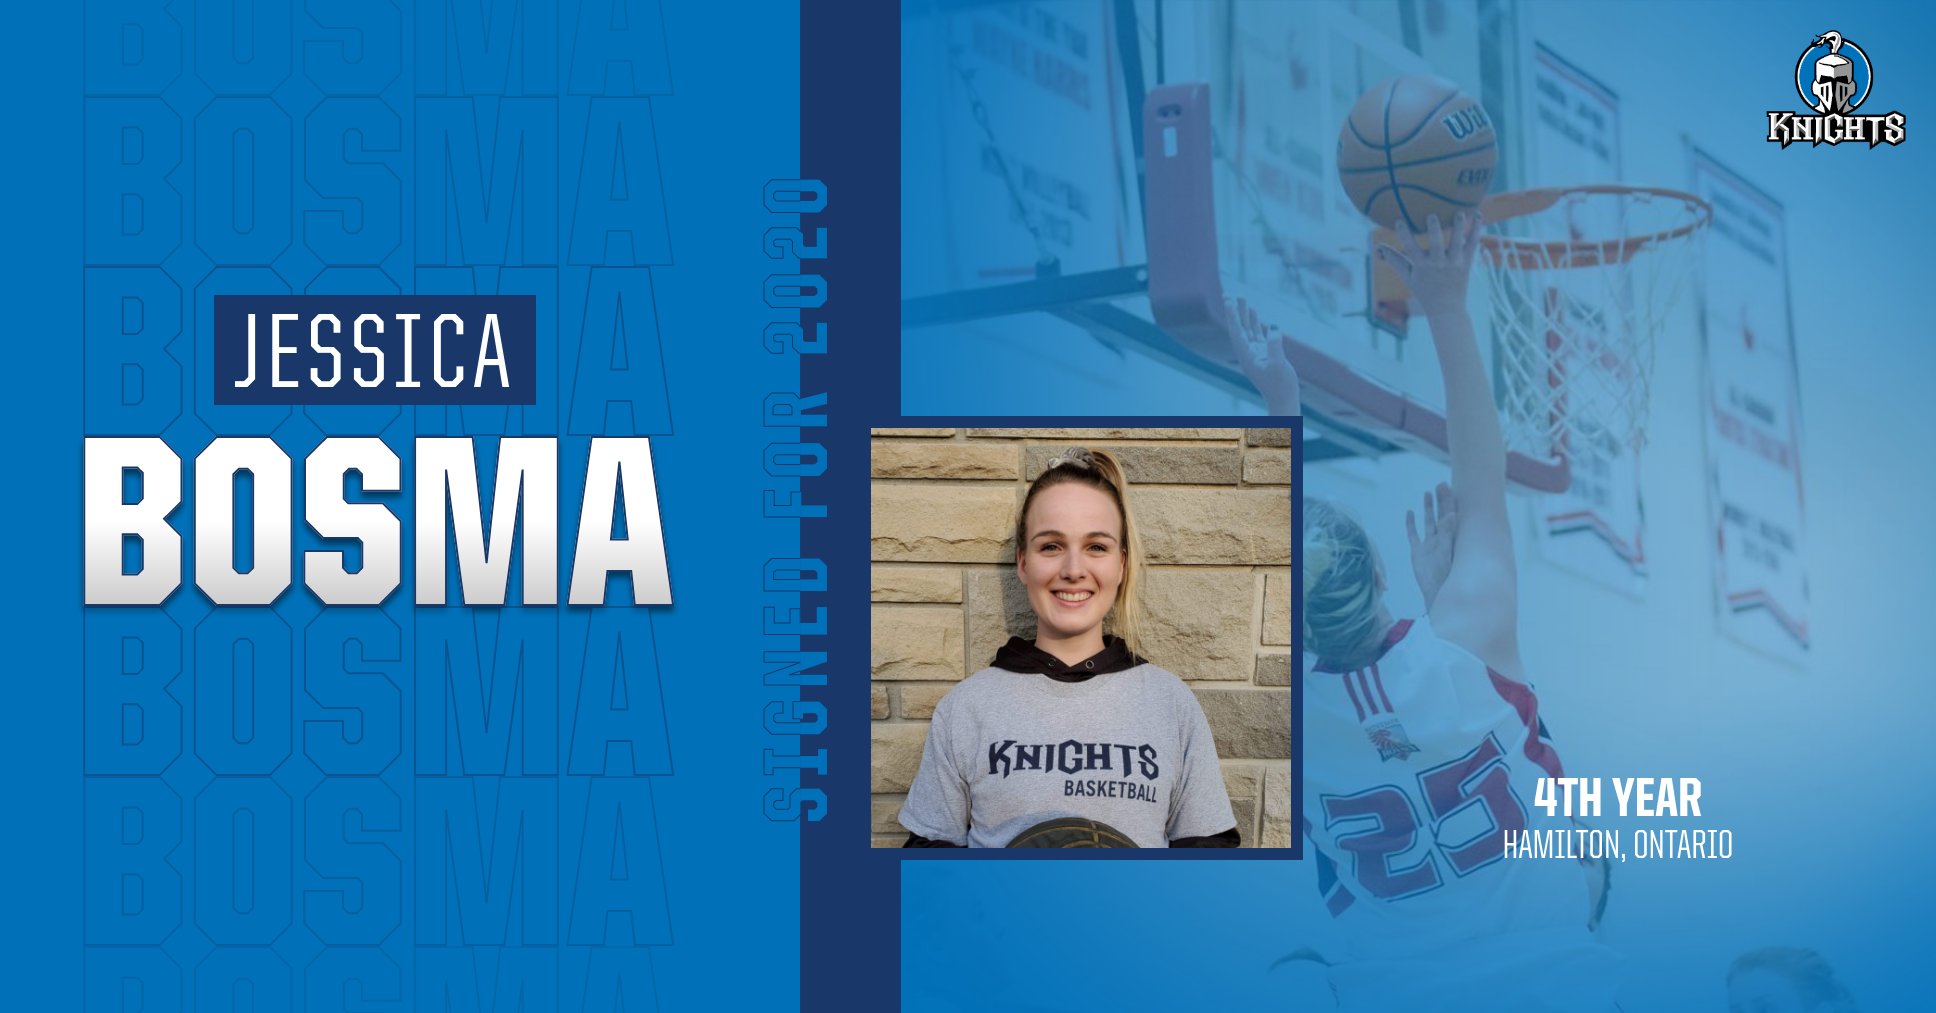 Knights Women's Hoops Add 2018 OCAA West Scoring Champion to Roster